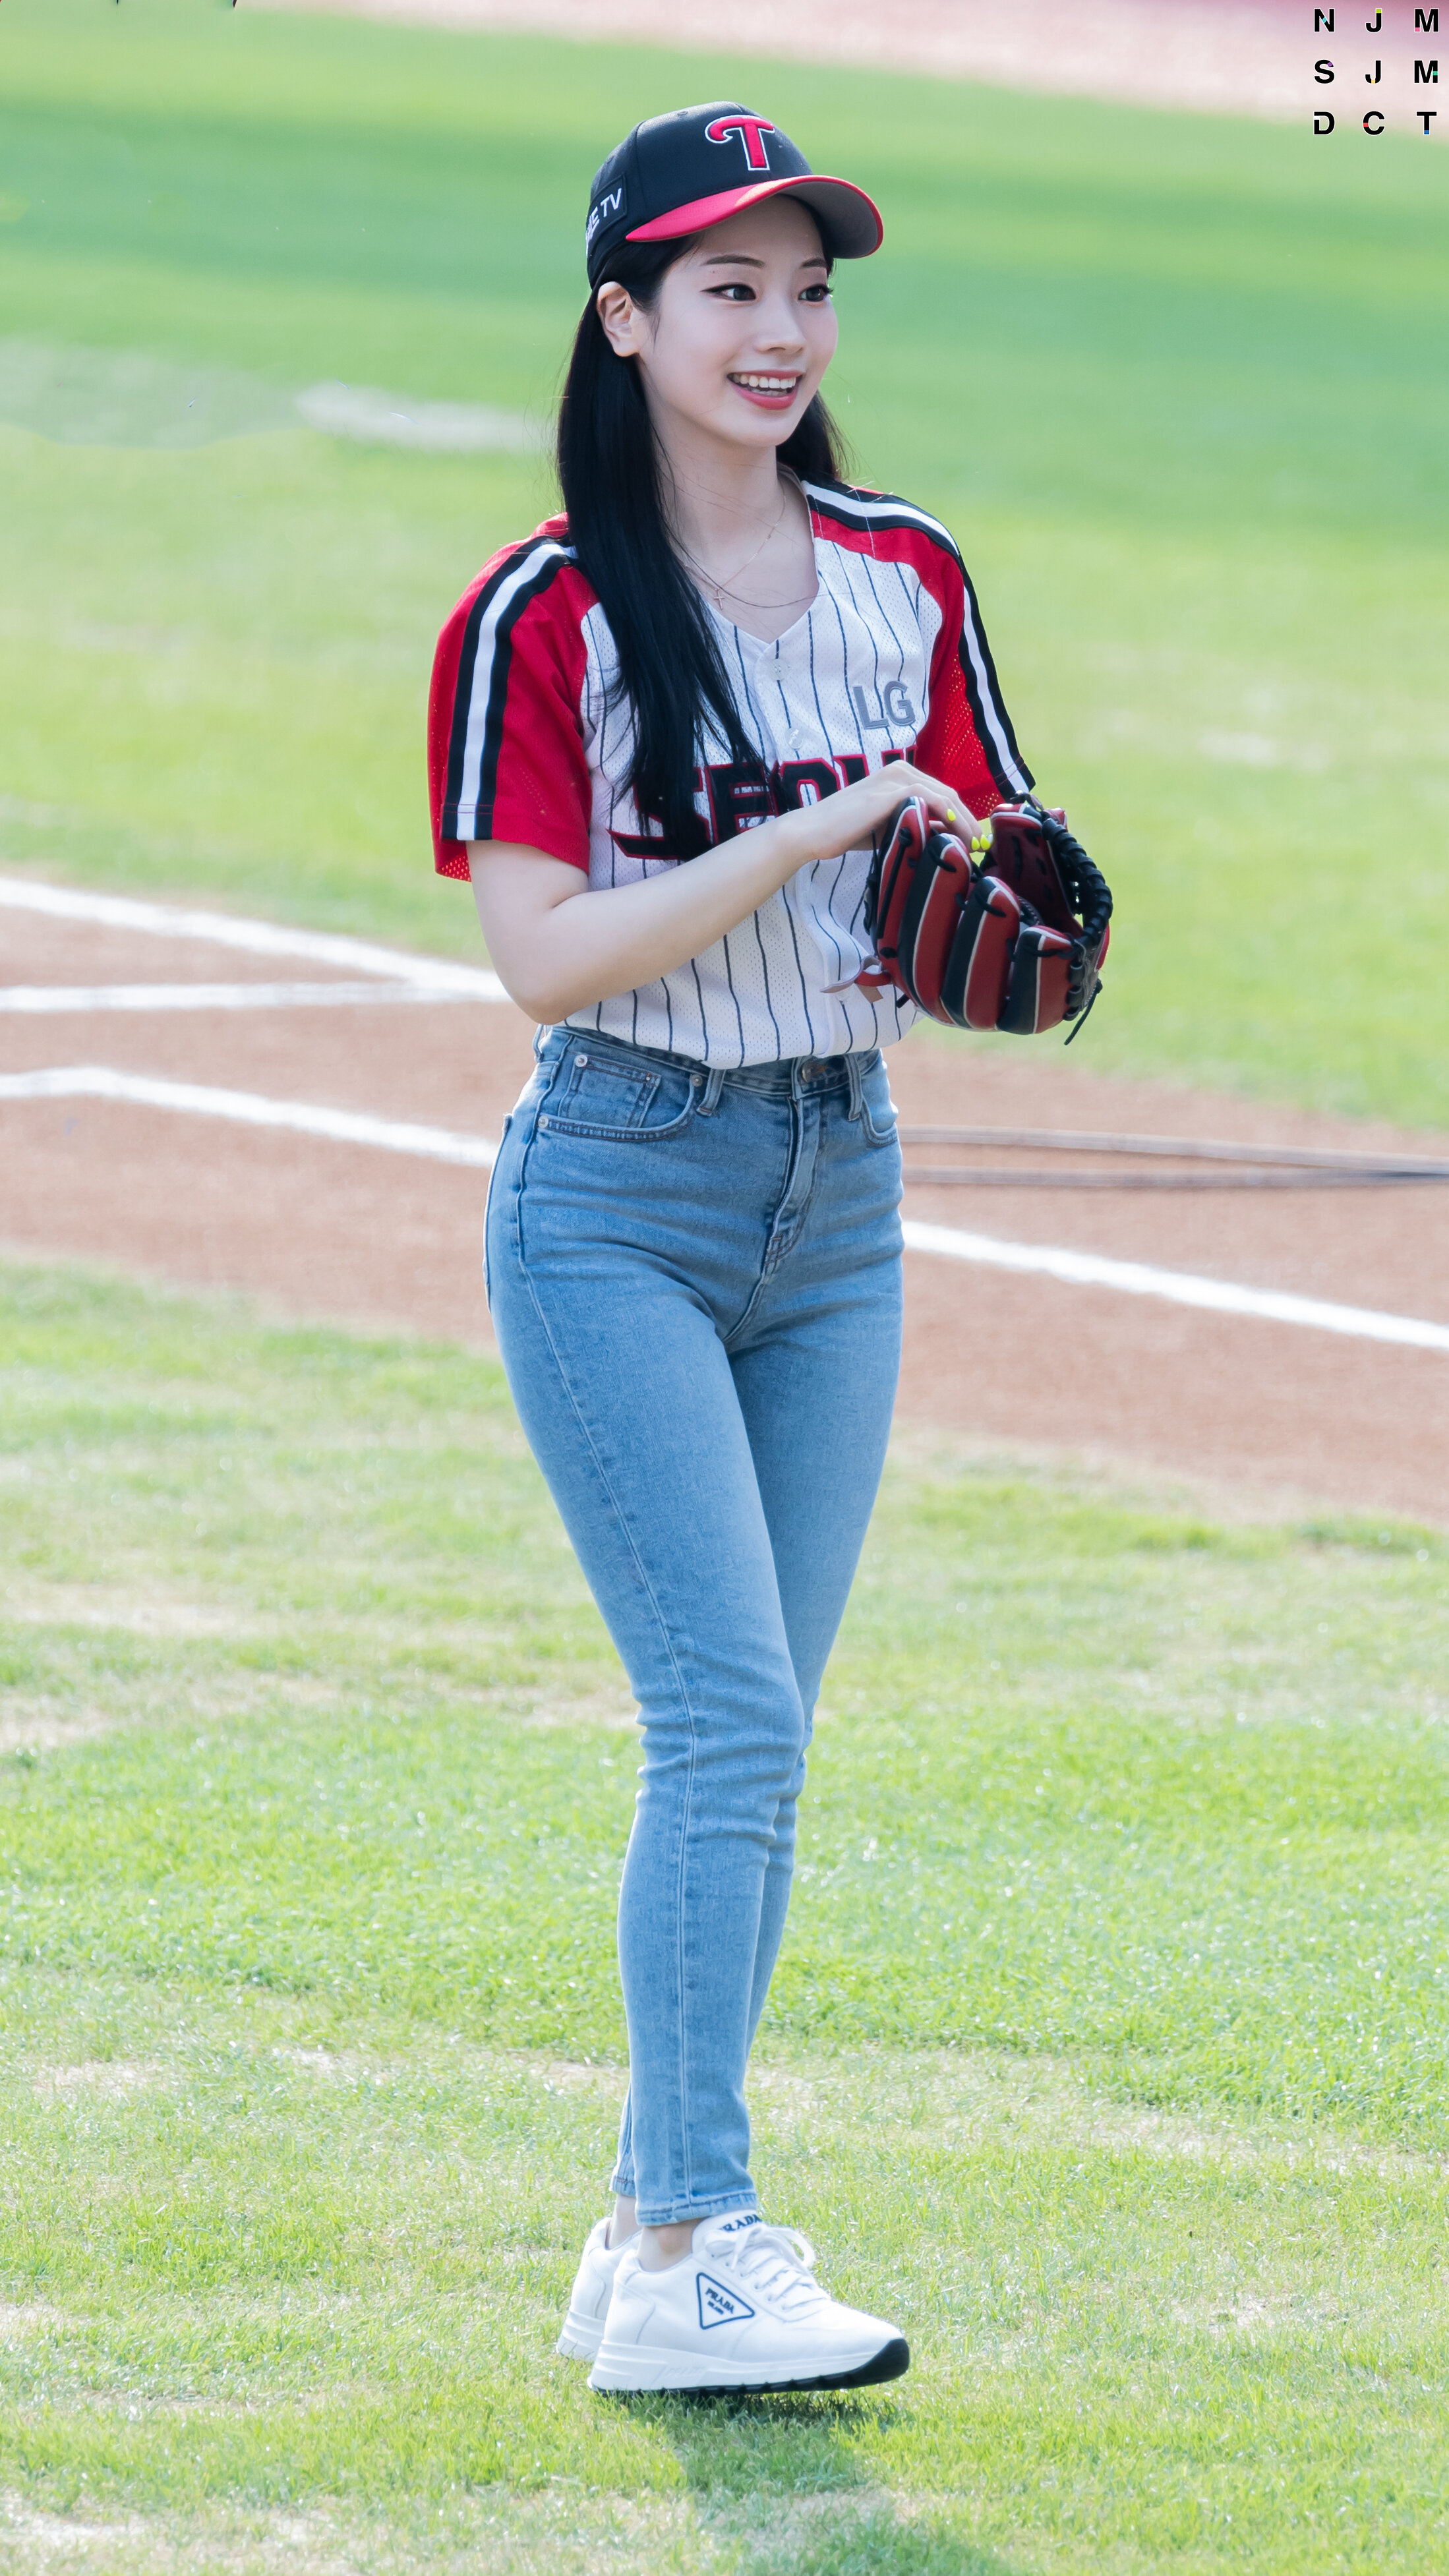 TWICE's Dahyun to throw the first pitch for the LG Twins